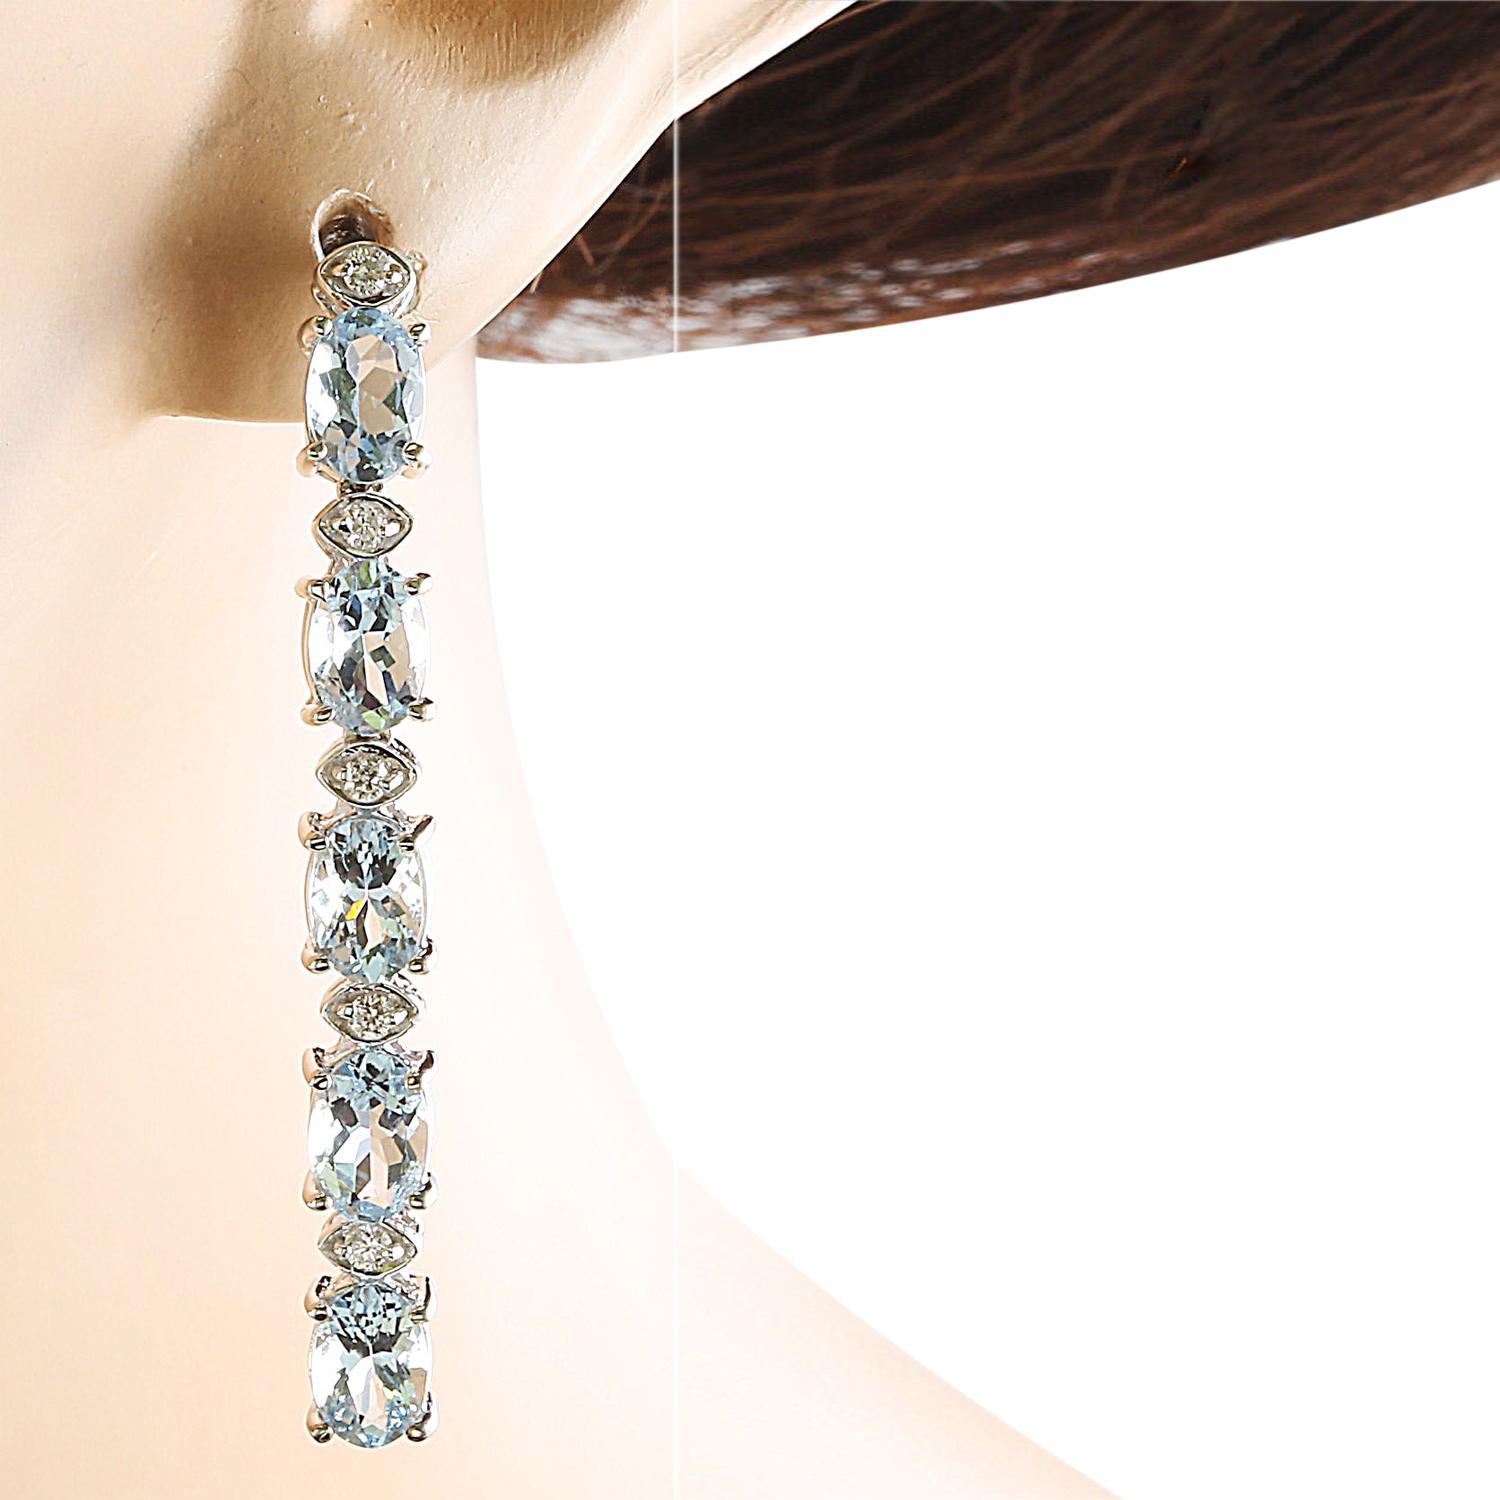 Modern Dazzling Natural Aquamarine Diamond Earrings in 14K Solid White Gold For Sale